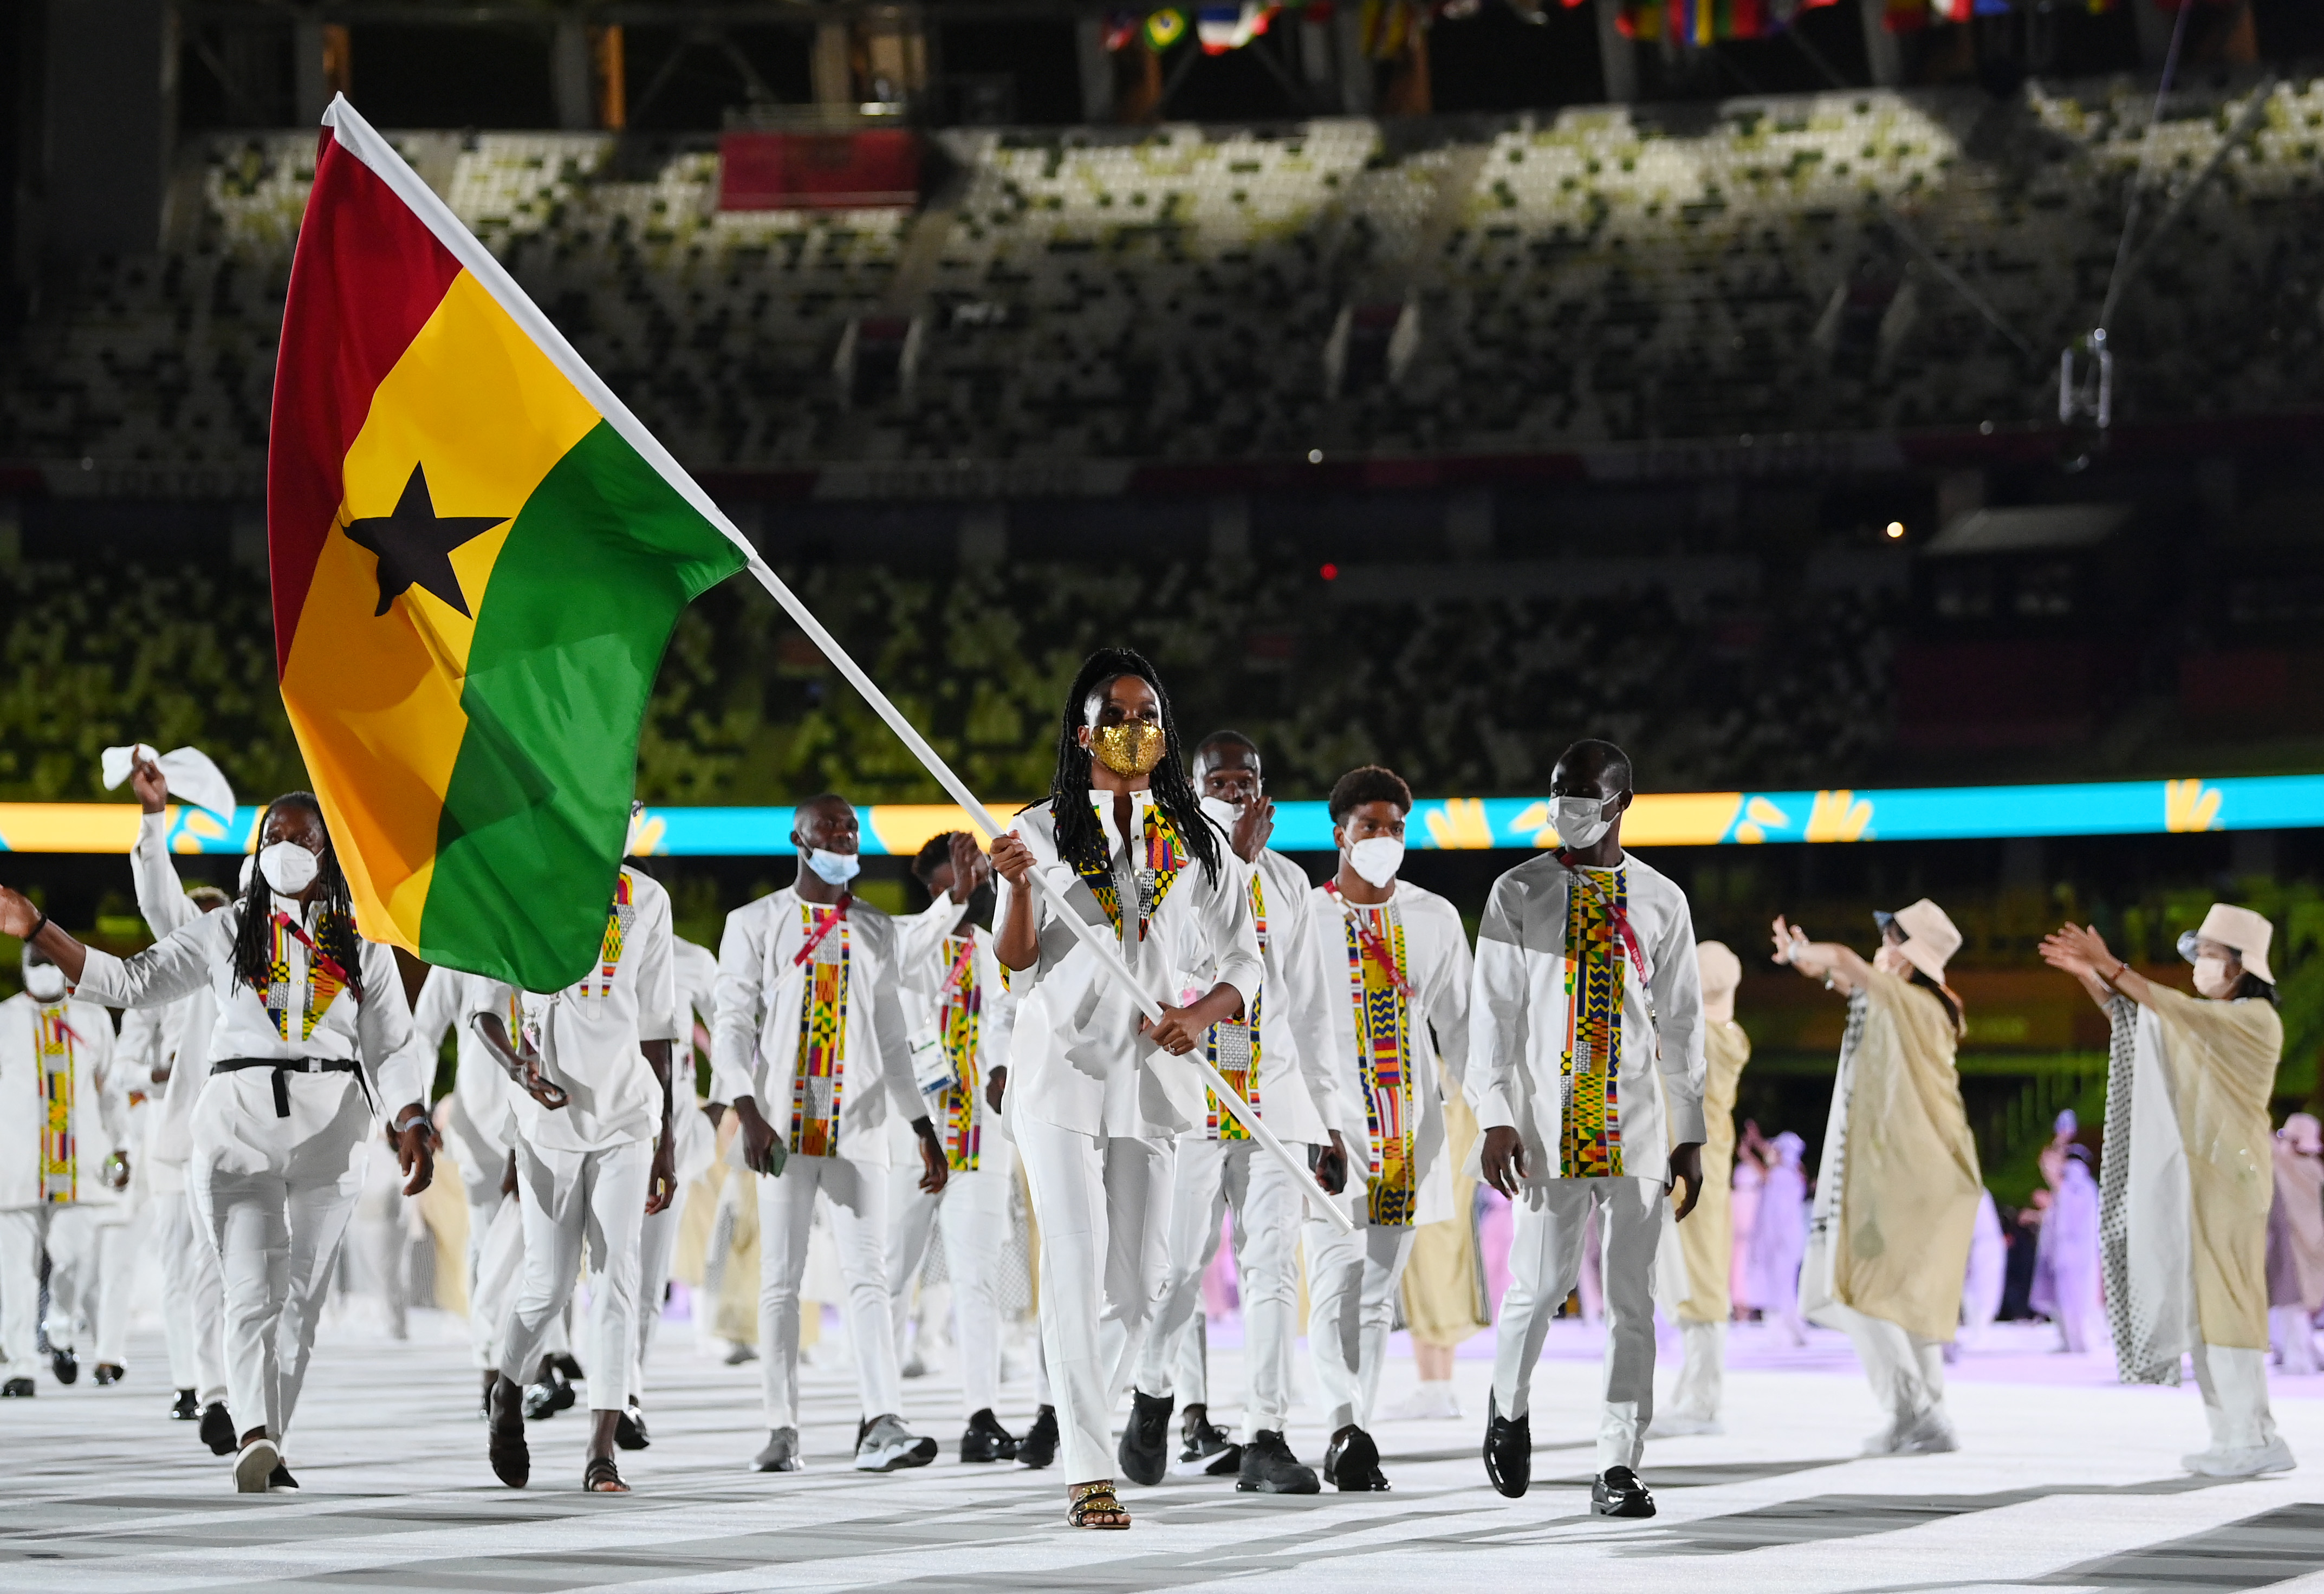 Flag bearers Nadia Eke and Sulemanu Tetteh of Team Ghana during the Opening Ceremony of the Tokyo 2020 Olympic Games (Getty Images—2021 Getty Images)